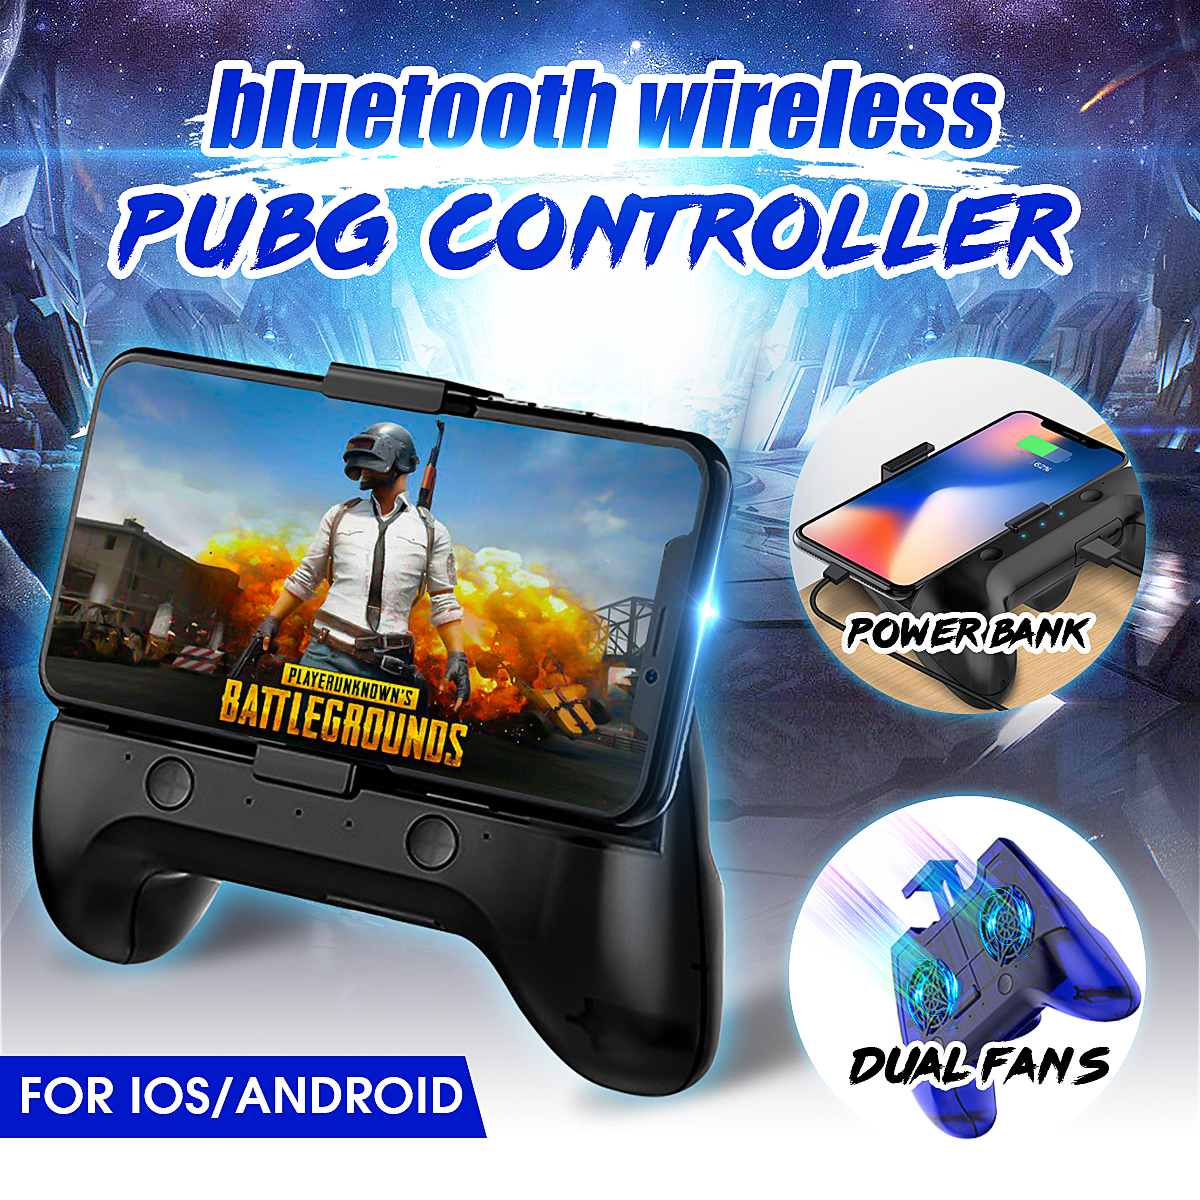 Wireless-bluetooth-Gamepad-Game-Controller-Joystick-Cooling-Fan-for-PUBG-Android-IOS-Mobile-Phone-1461047-1